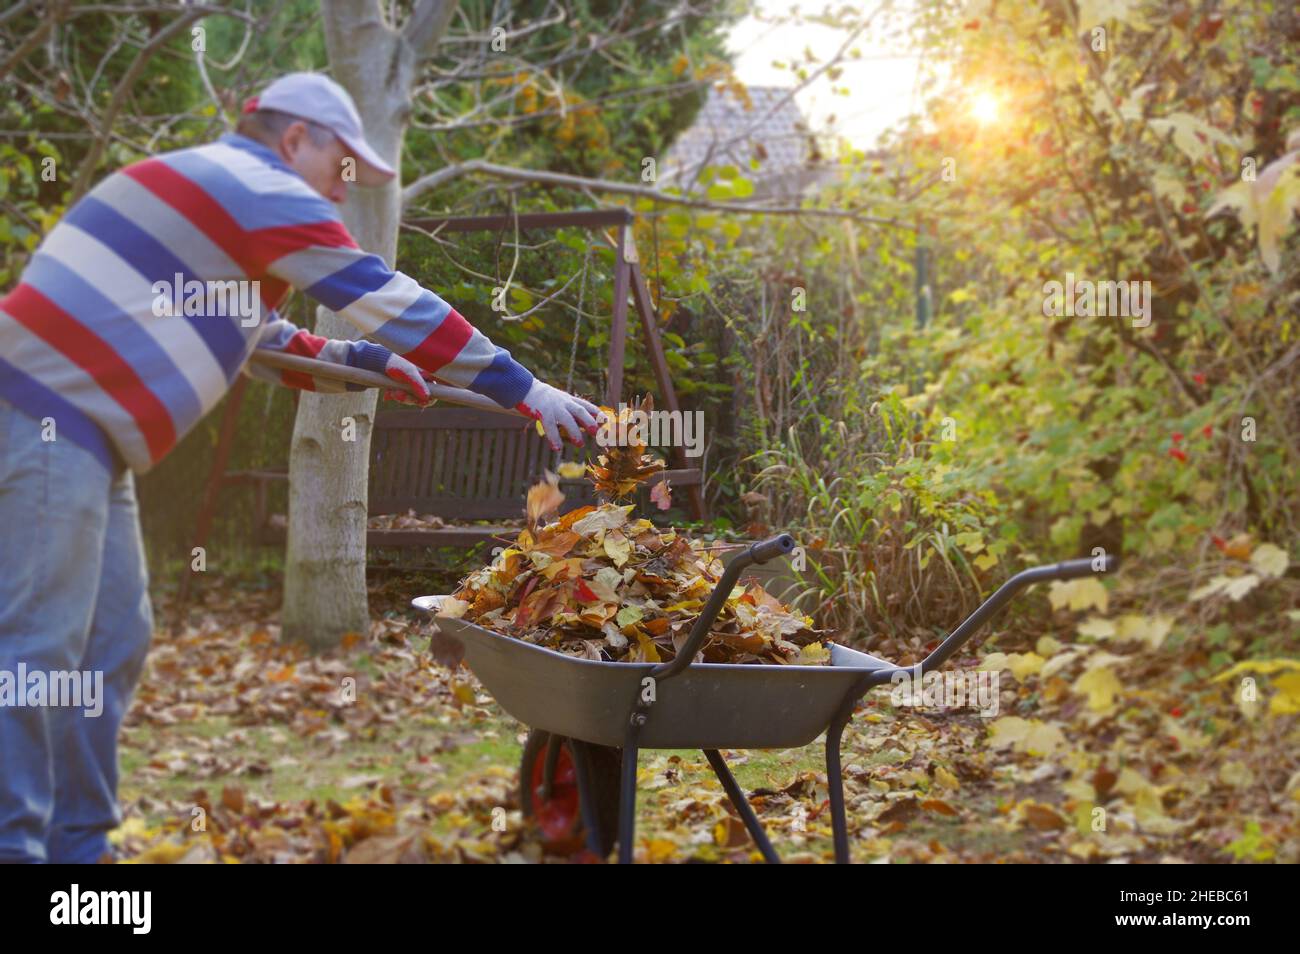 Autumn raking leaves in the garden. Cleaning in the backyard. Stock Photo